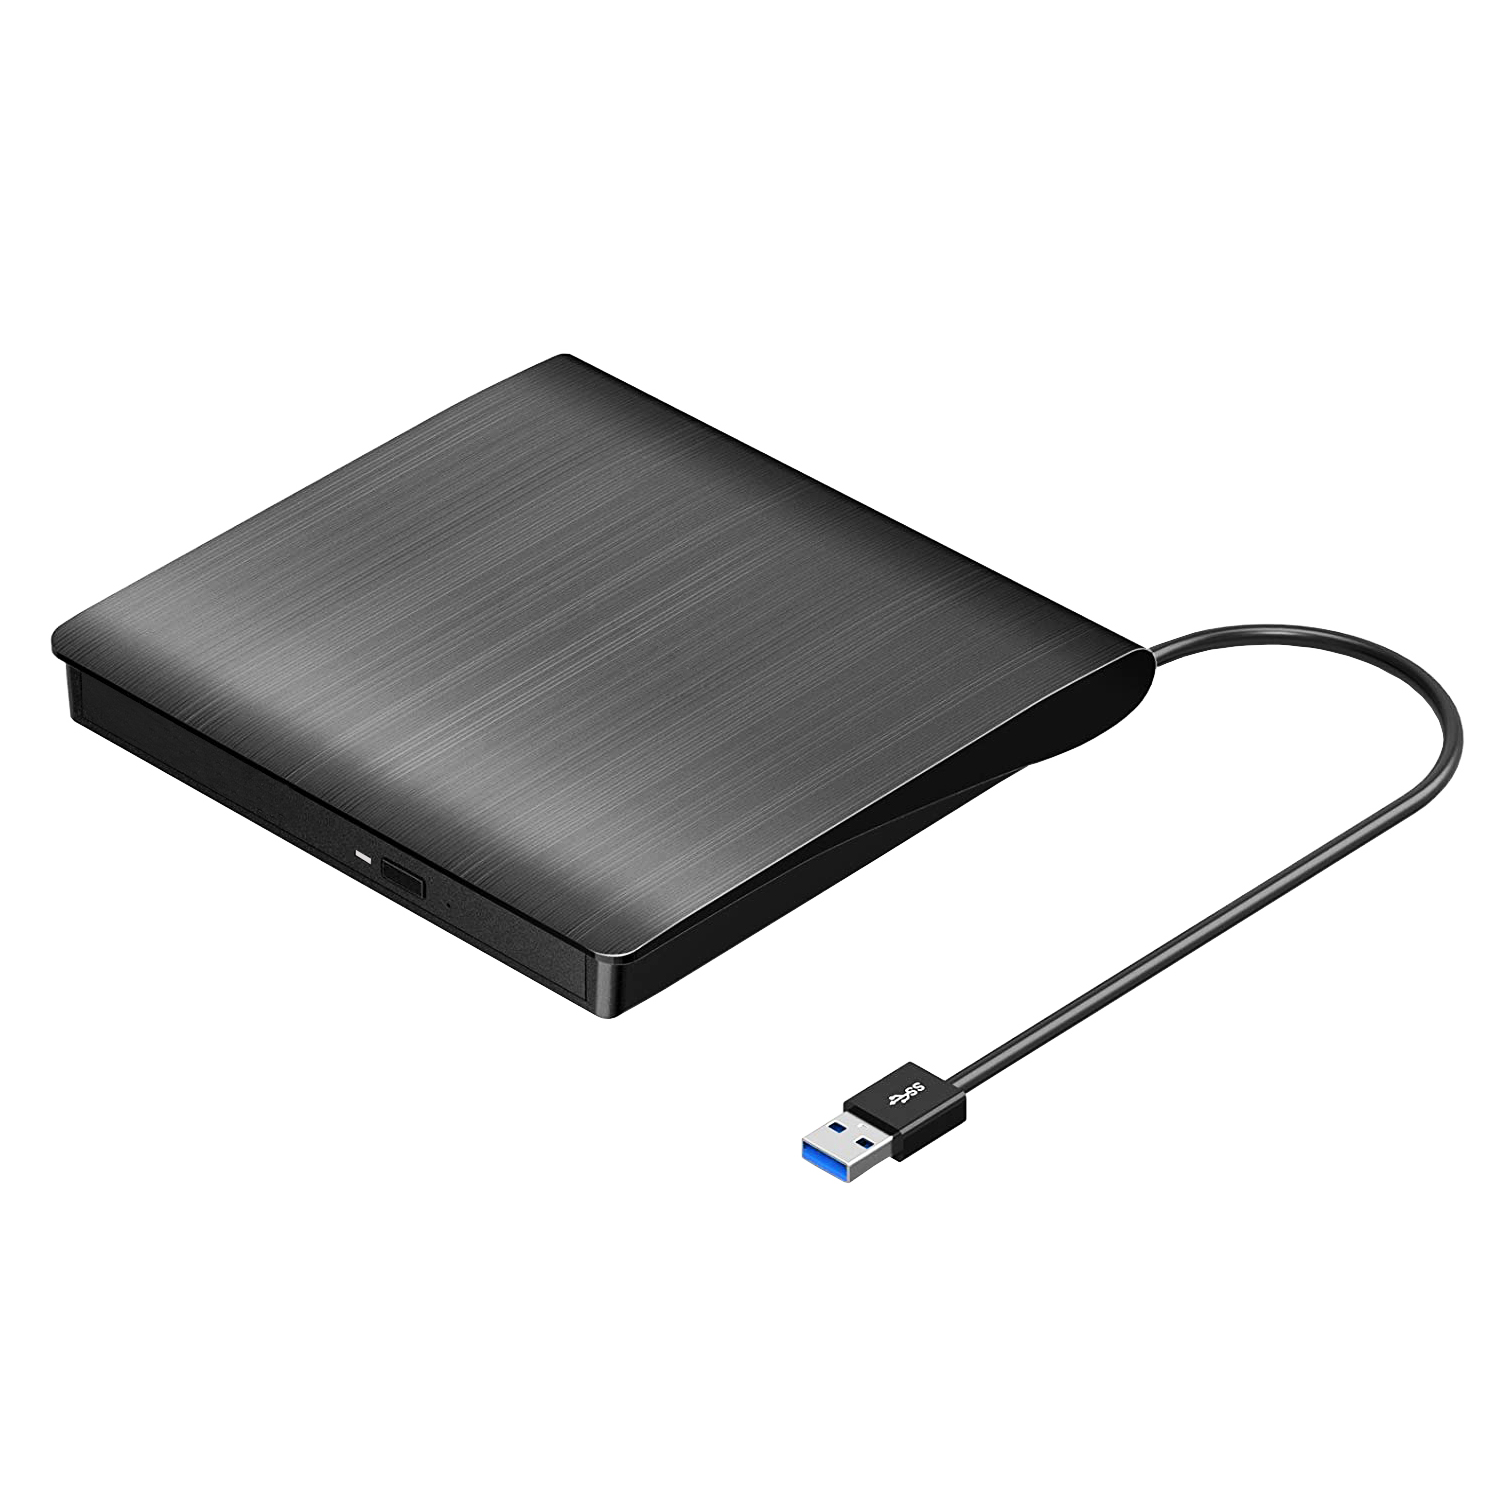 External CD/DVD Drive for Laptop USB 3.0 Portable RW Drive/DVD Player for  Laptop CD ROM Burner Compatible with Laptop Desktop PC Windows Linux OS Mac